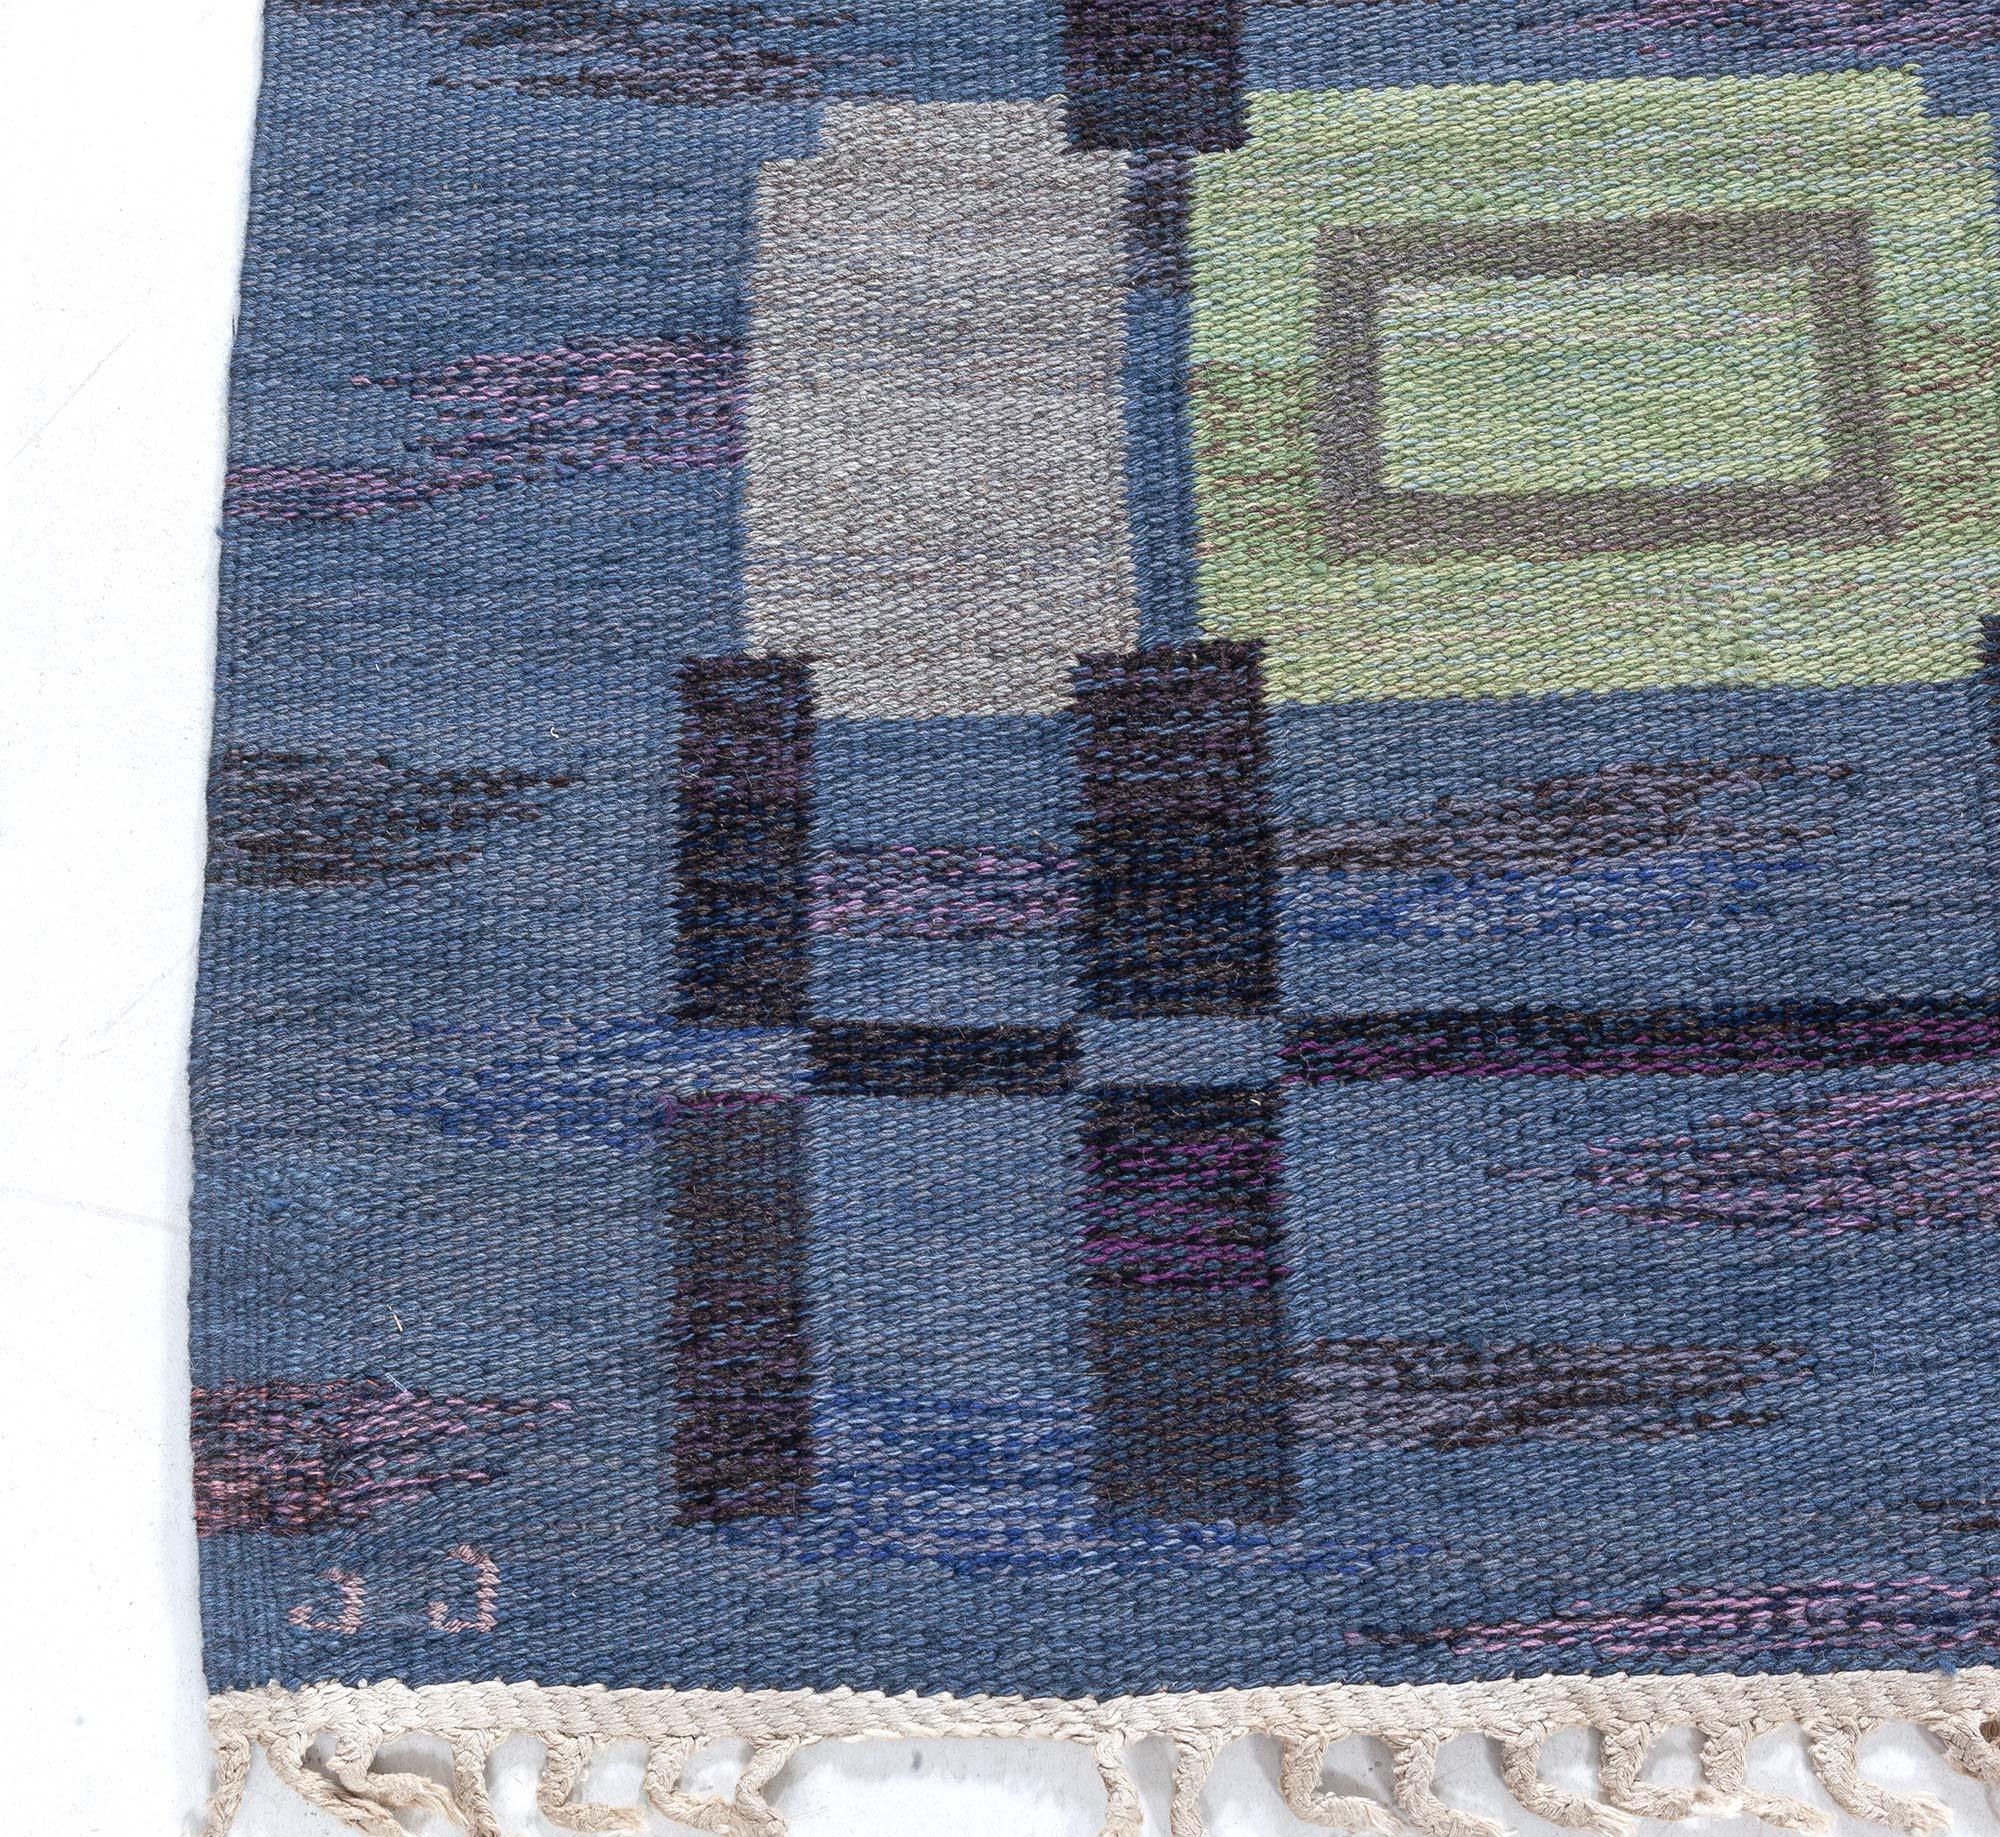 Vintage Swedish Flat Weave Rug by Judith Johansson (Spise Hall) In Good Condition For Sale In New York, NY